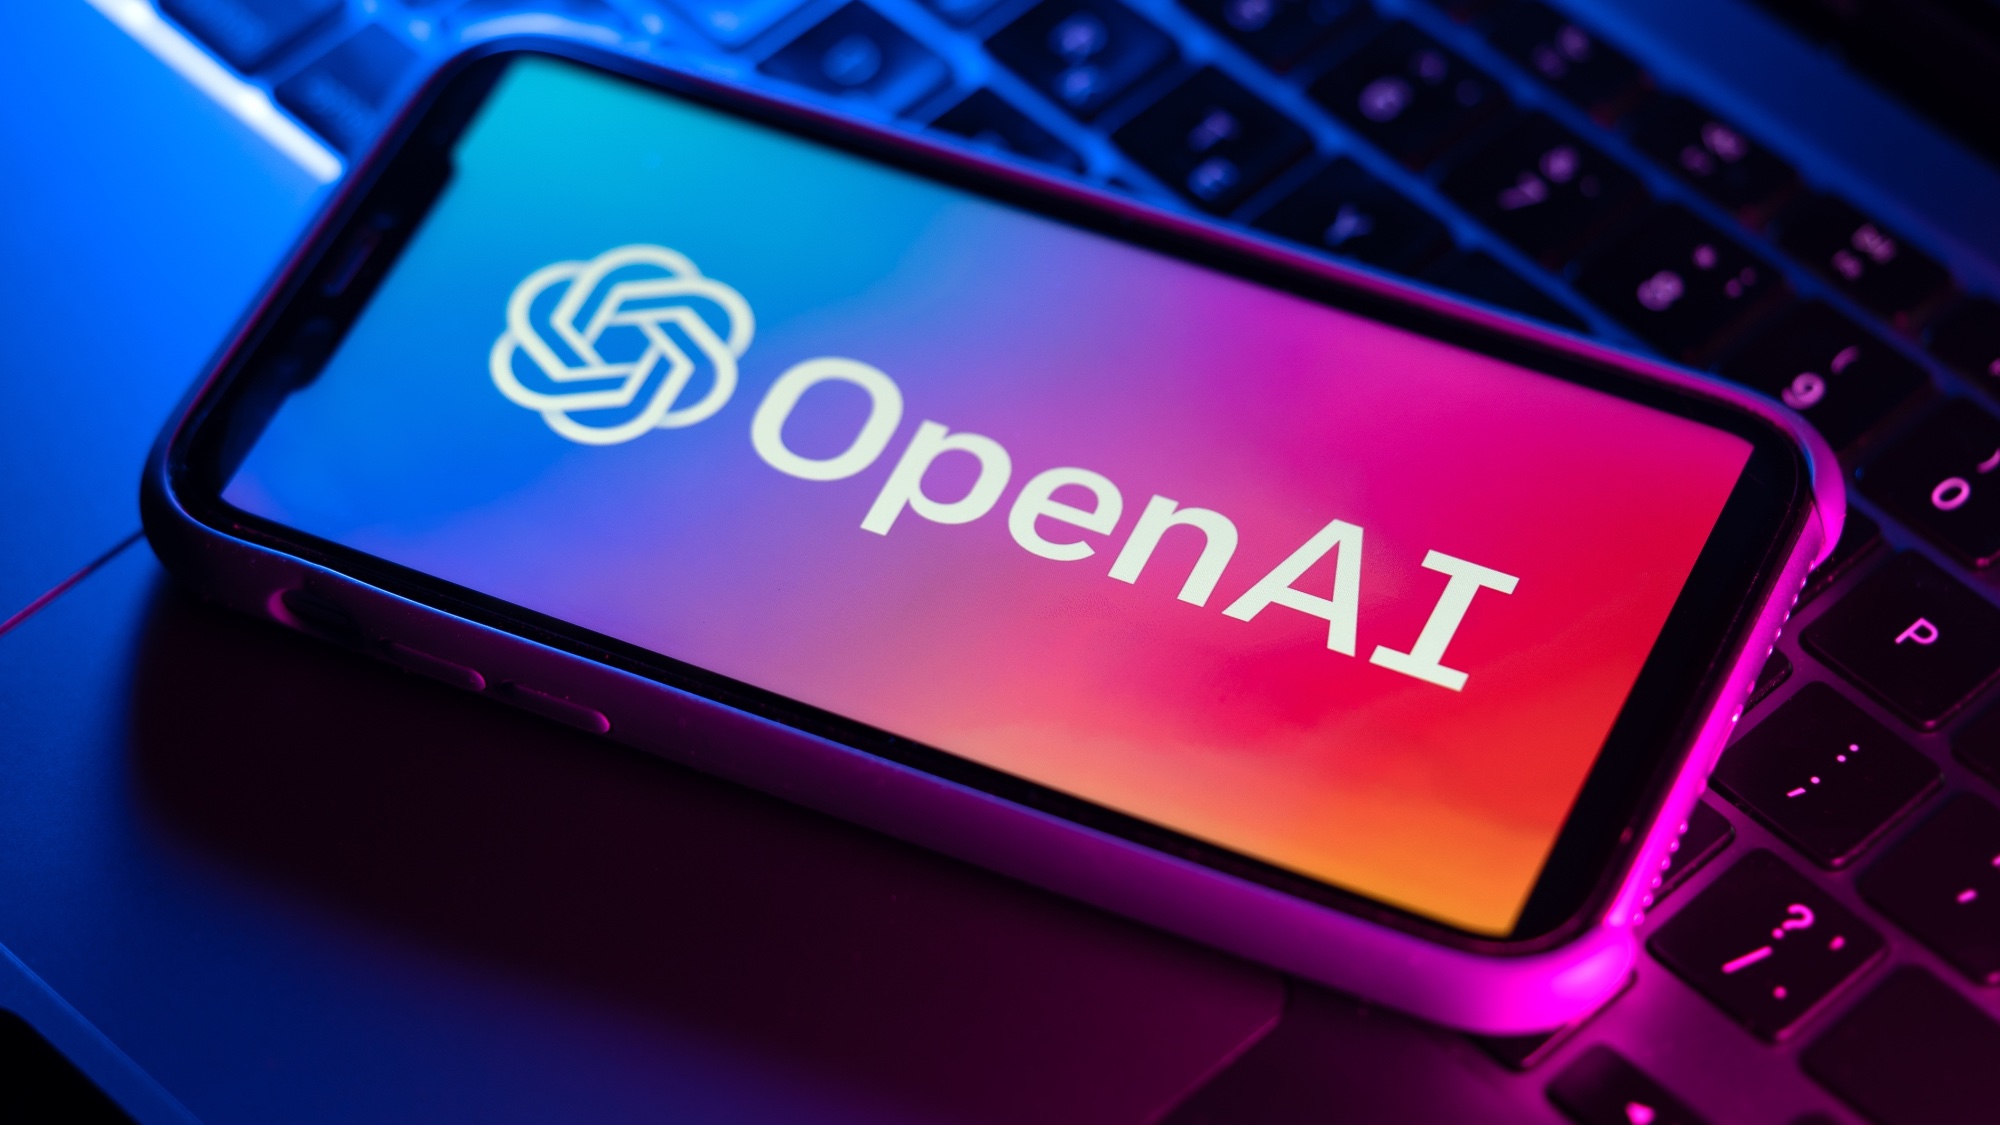 The OpenAI logo is on the phone above the laptop keyboard